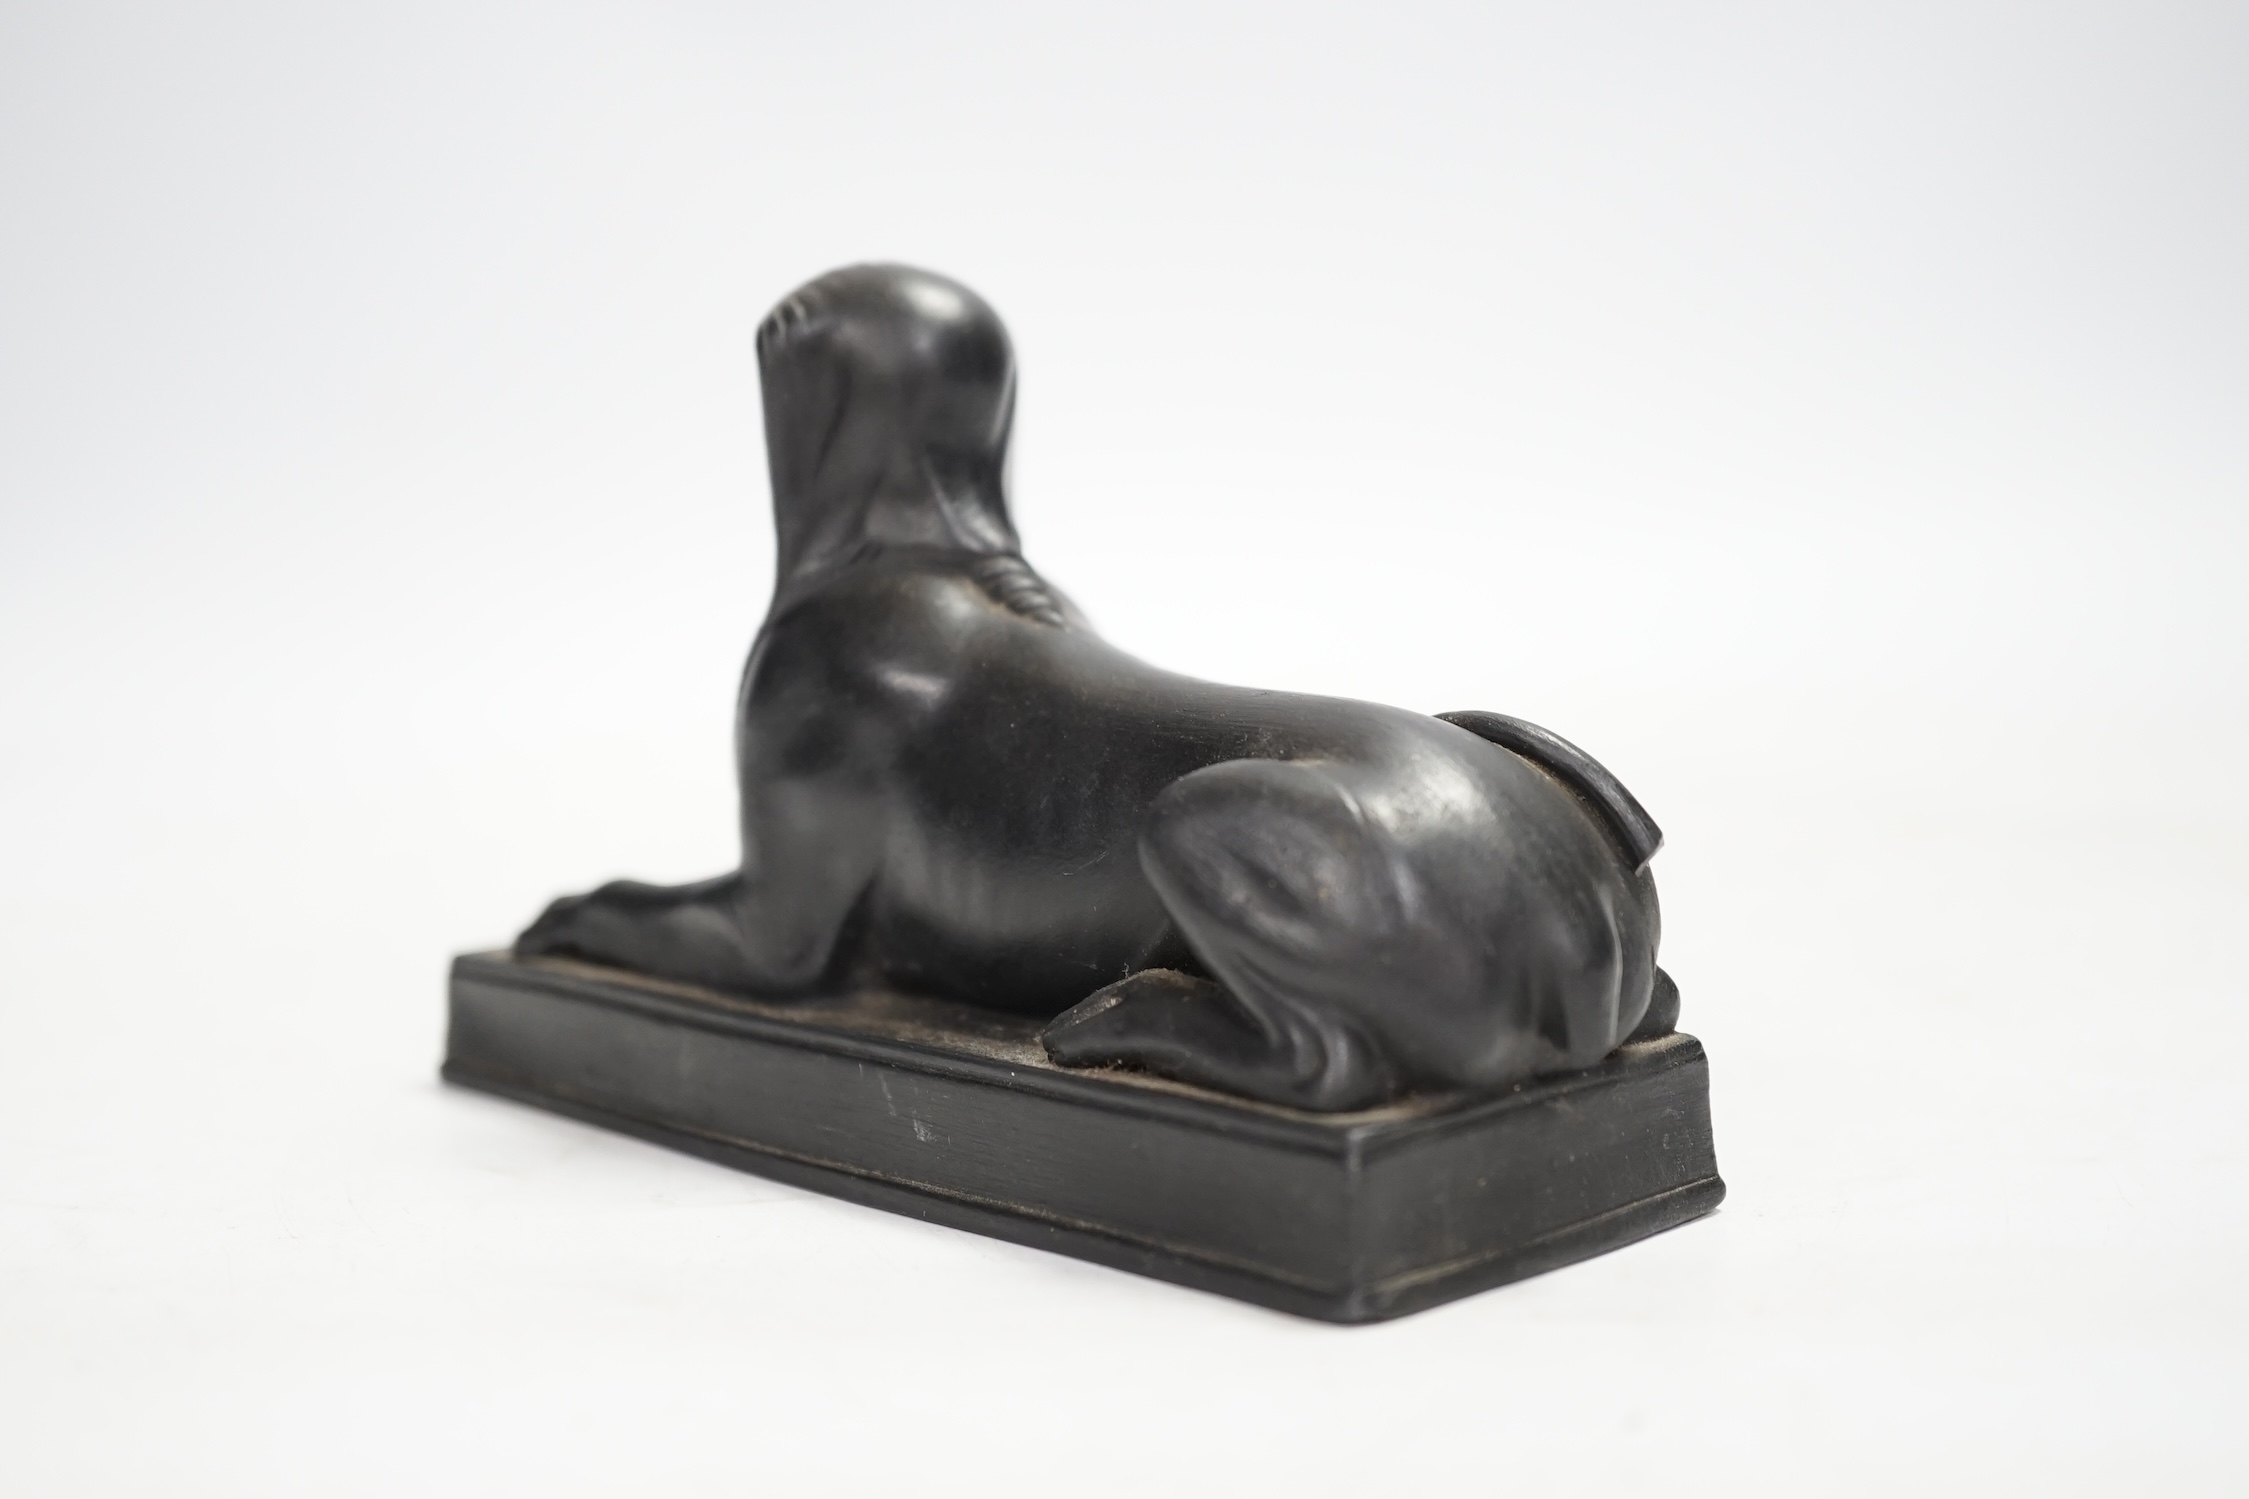 A 19th century Wedgwood basalt model of a sphinx. Condition - loss to tail, minor rubbing, fair